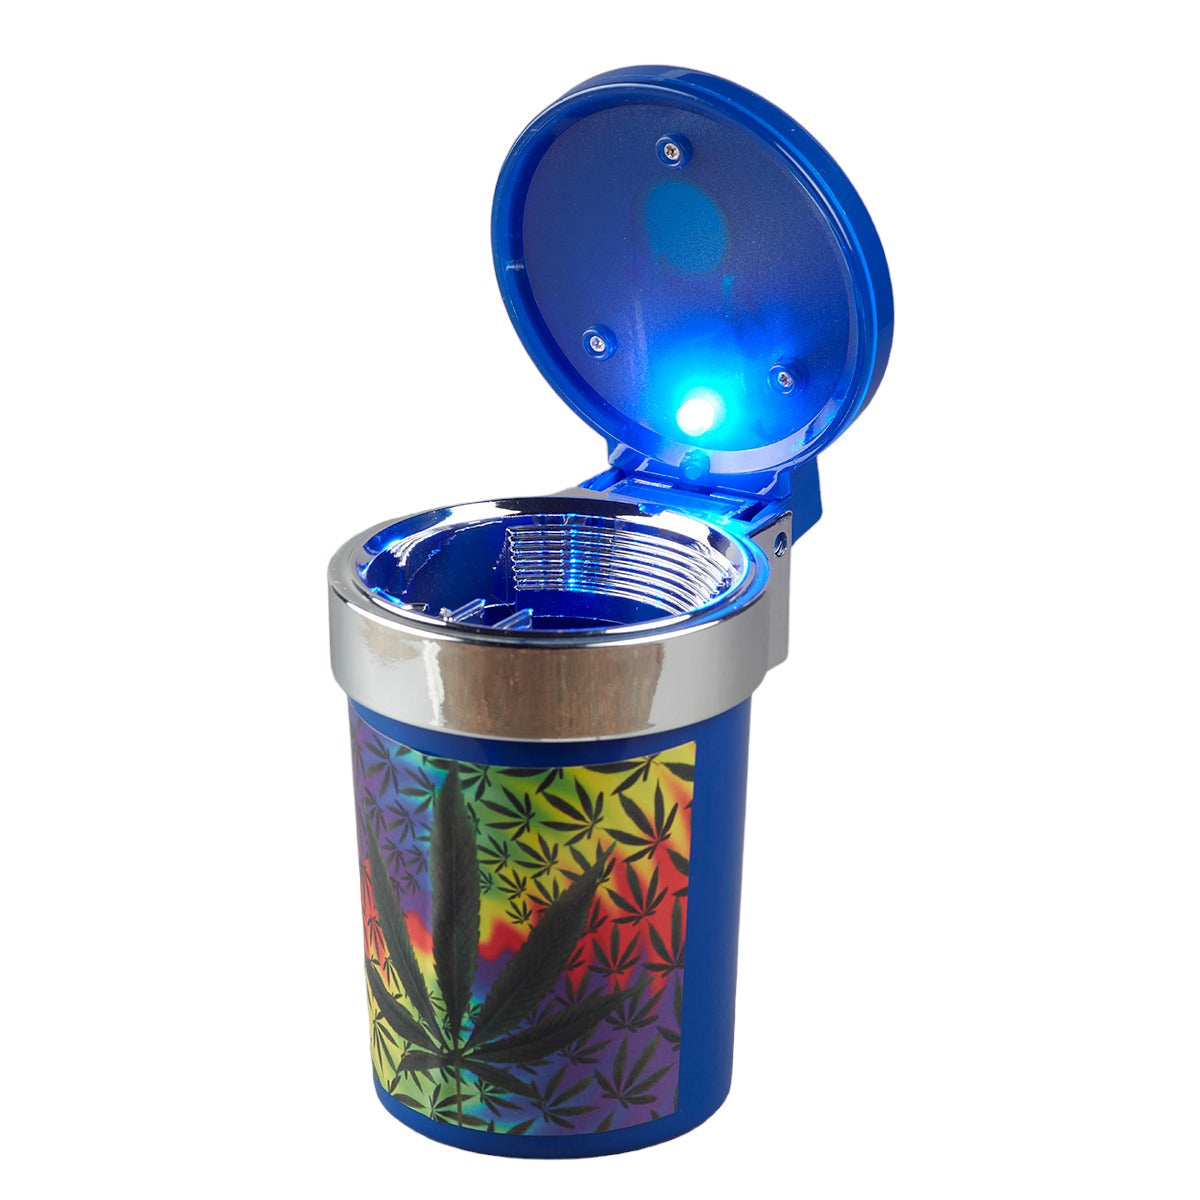 Plastic Car Ashtray Bucket with Lid and LED for Smokers (9787)